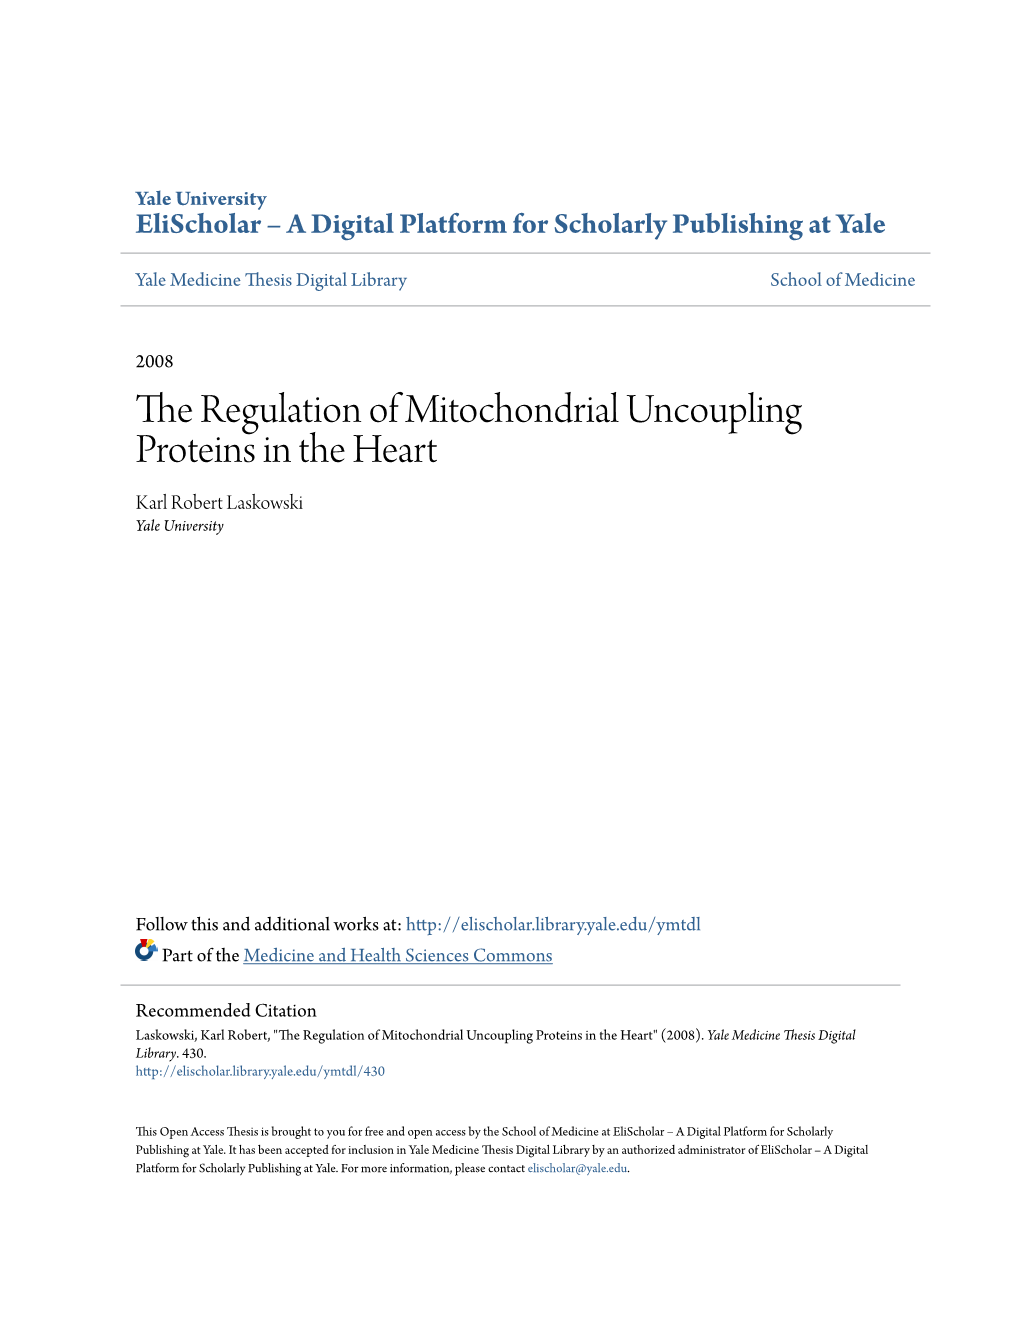 The Regulation of Mitochondrial Uncoupling Proteins in the Heart Karl Robert Laskowski Yale University